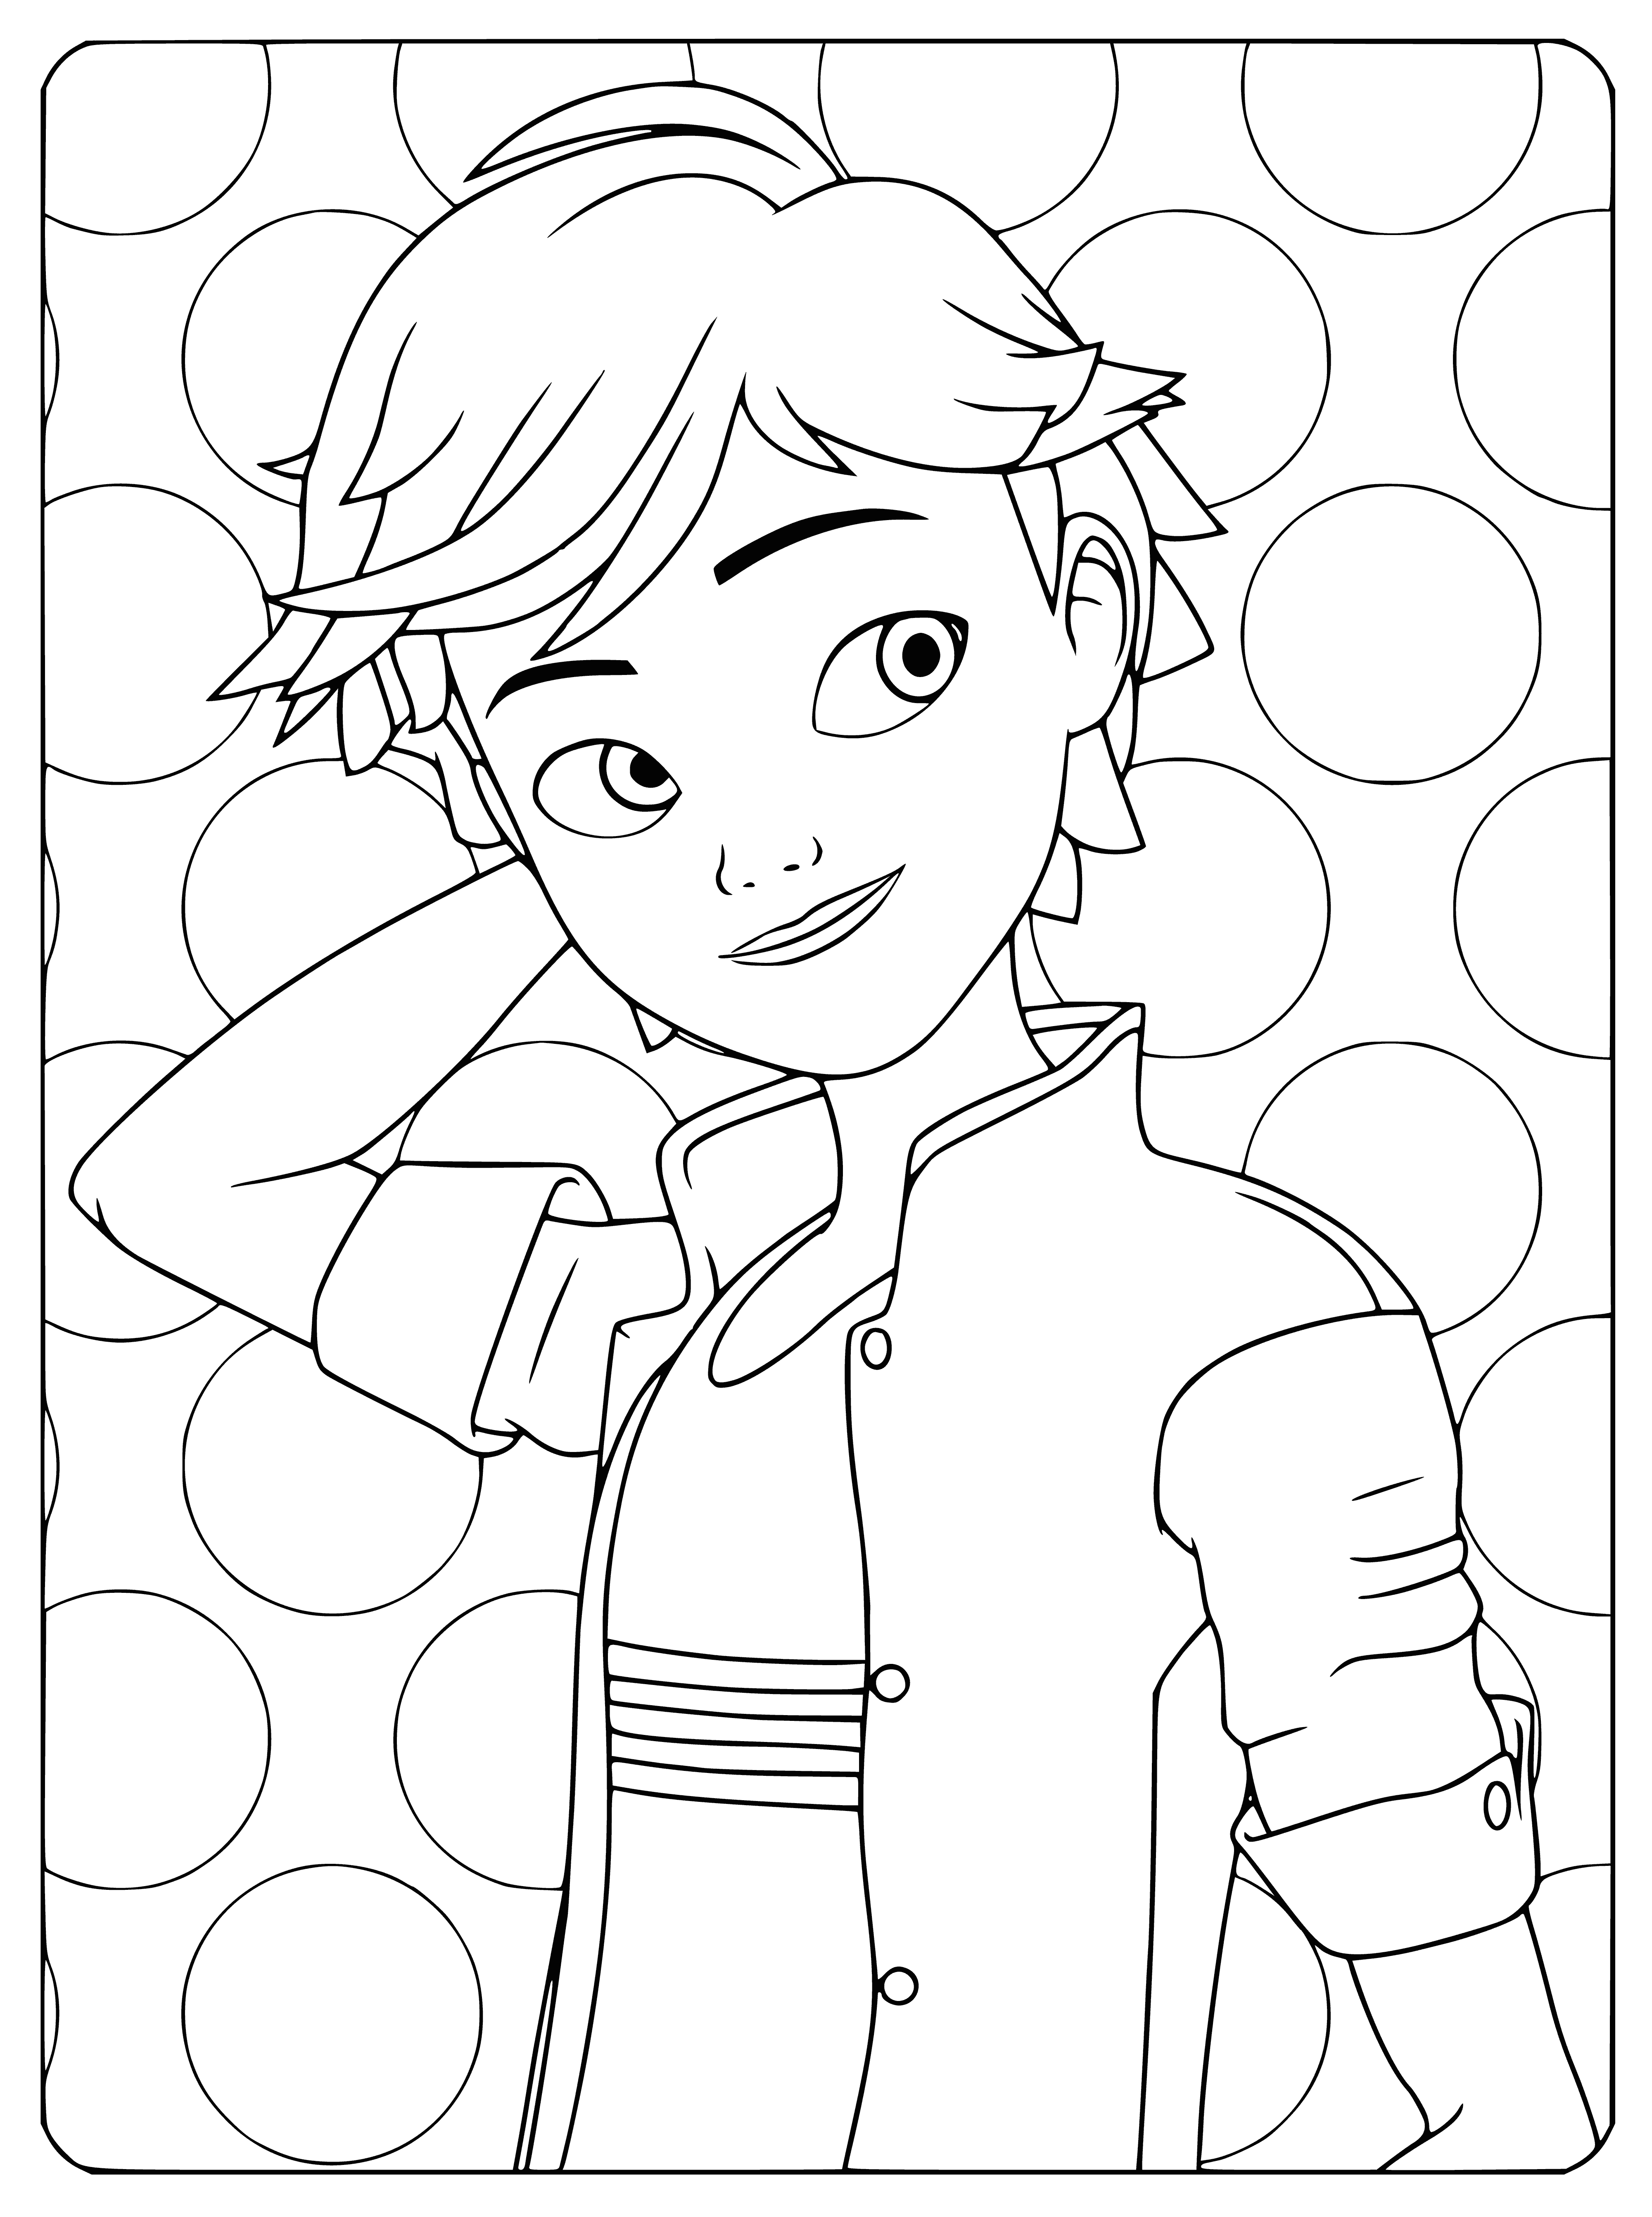 coloring page: Boy w/ short black hair,brown eyes wearing red sweater, black pants & mask w/red spots. Standing in front of a building.